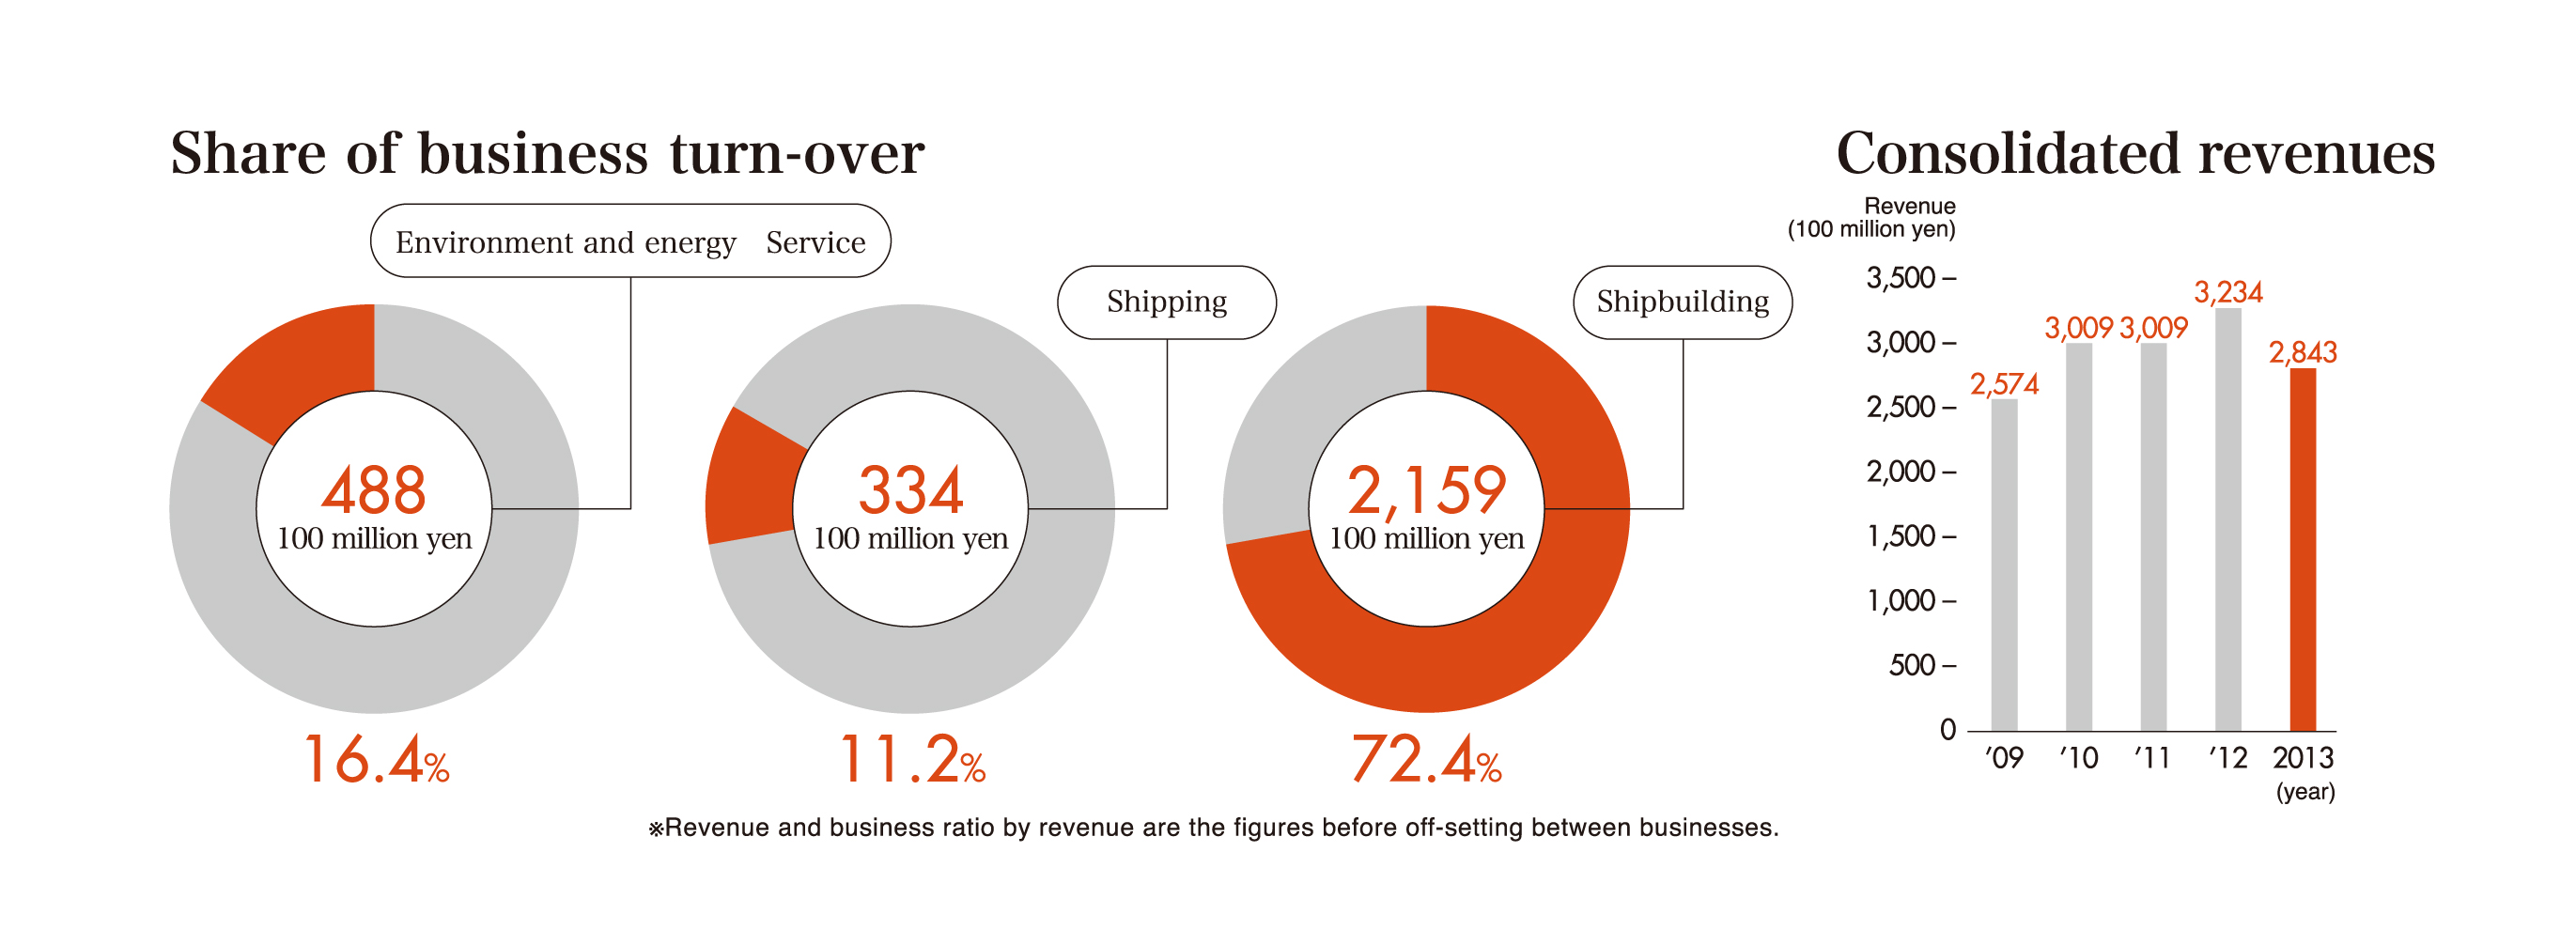 Share of business turn-over&Consolidated revenues